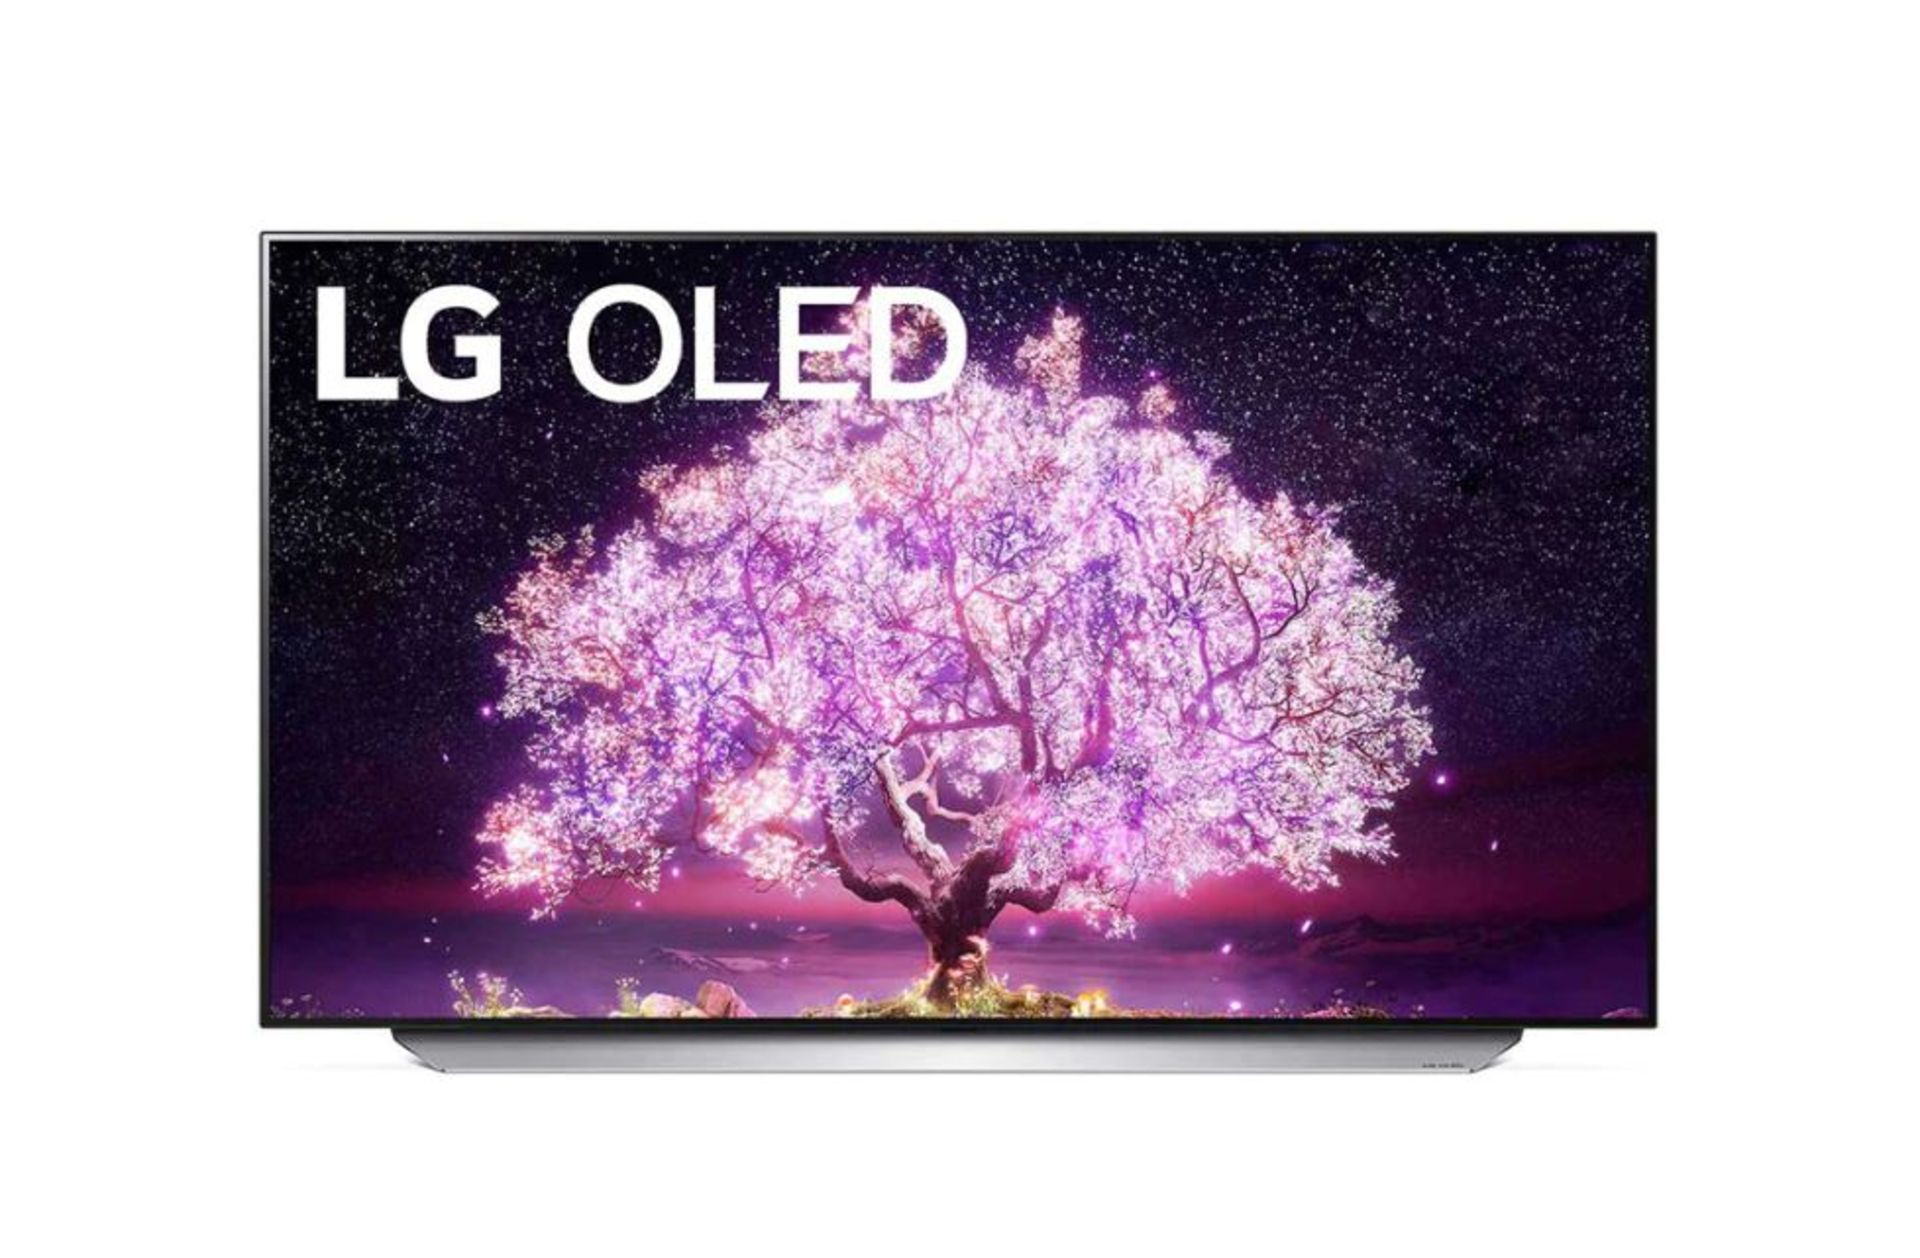 1 LG OLED55C14 55 INCH OLED 4K ULTRA HD HDR SMART TV FREEVIEW PLAY FREESAT WITH STAND AND REMOTE RRP